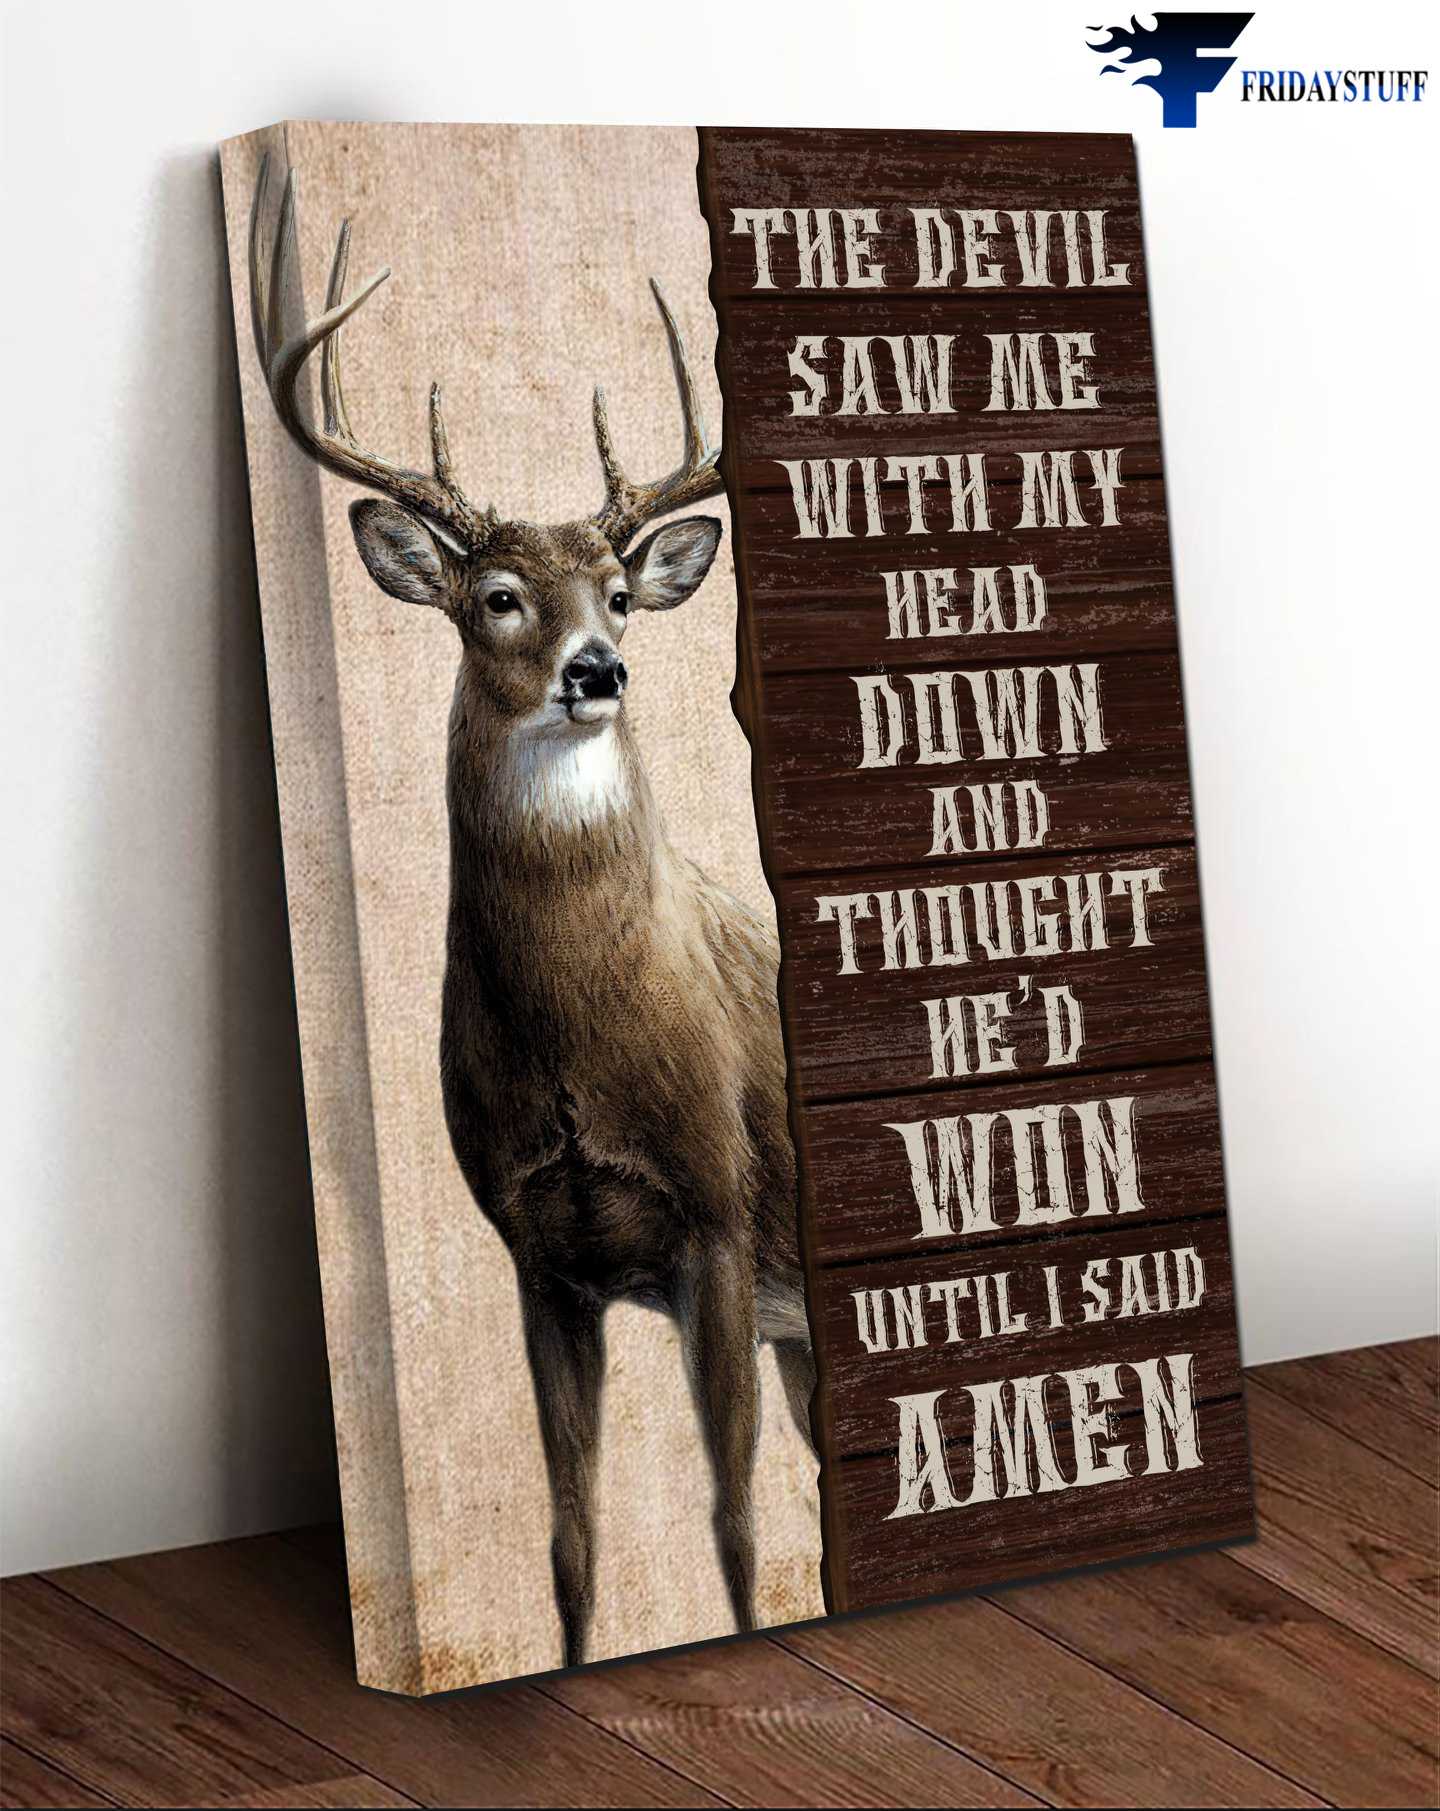 Deer Poster, The Devil Saw Me, With My Heart Down, And Throught He'd Won, Until I Said Amen